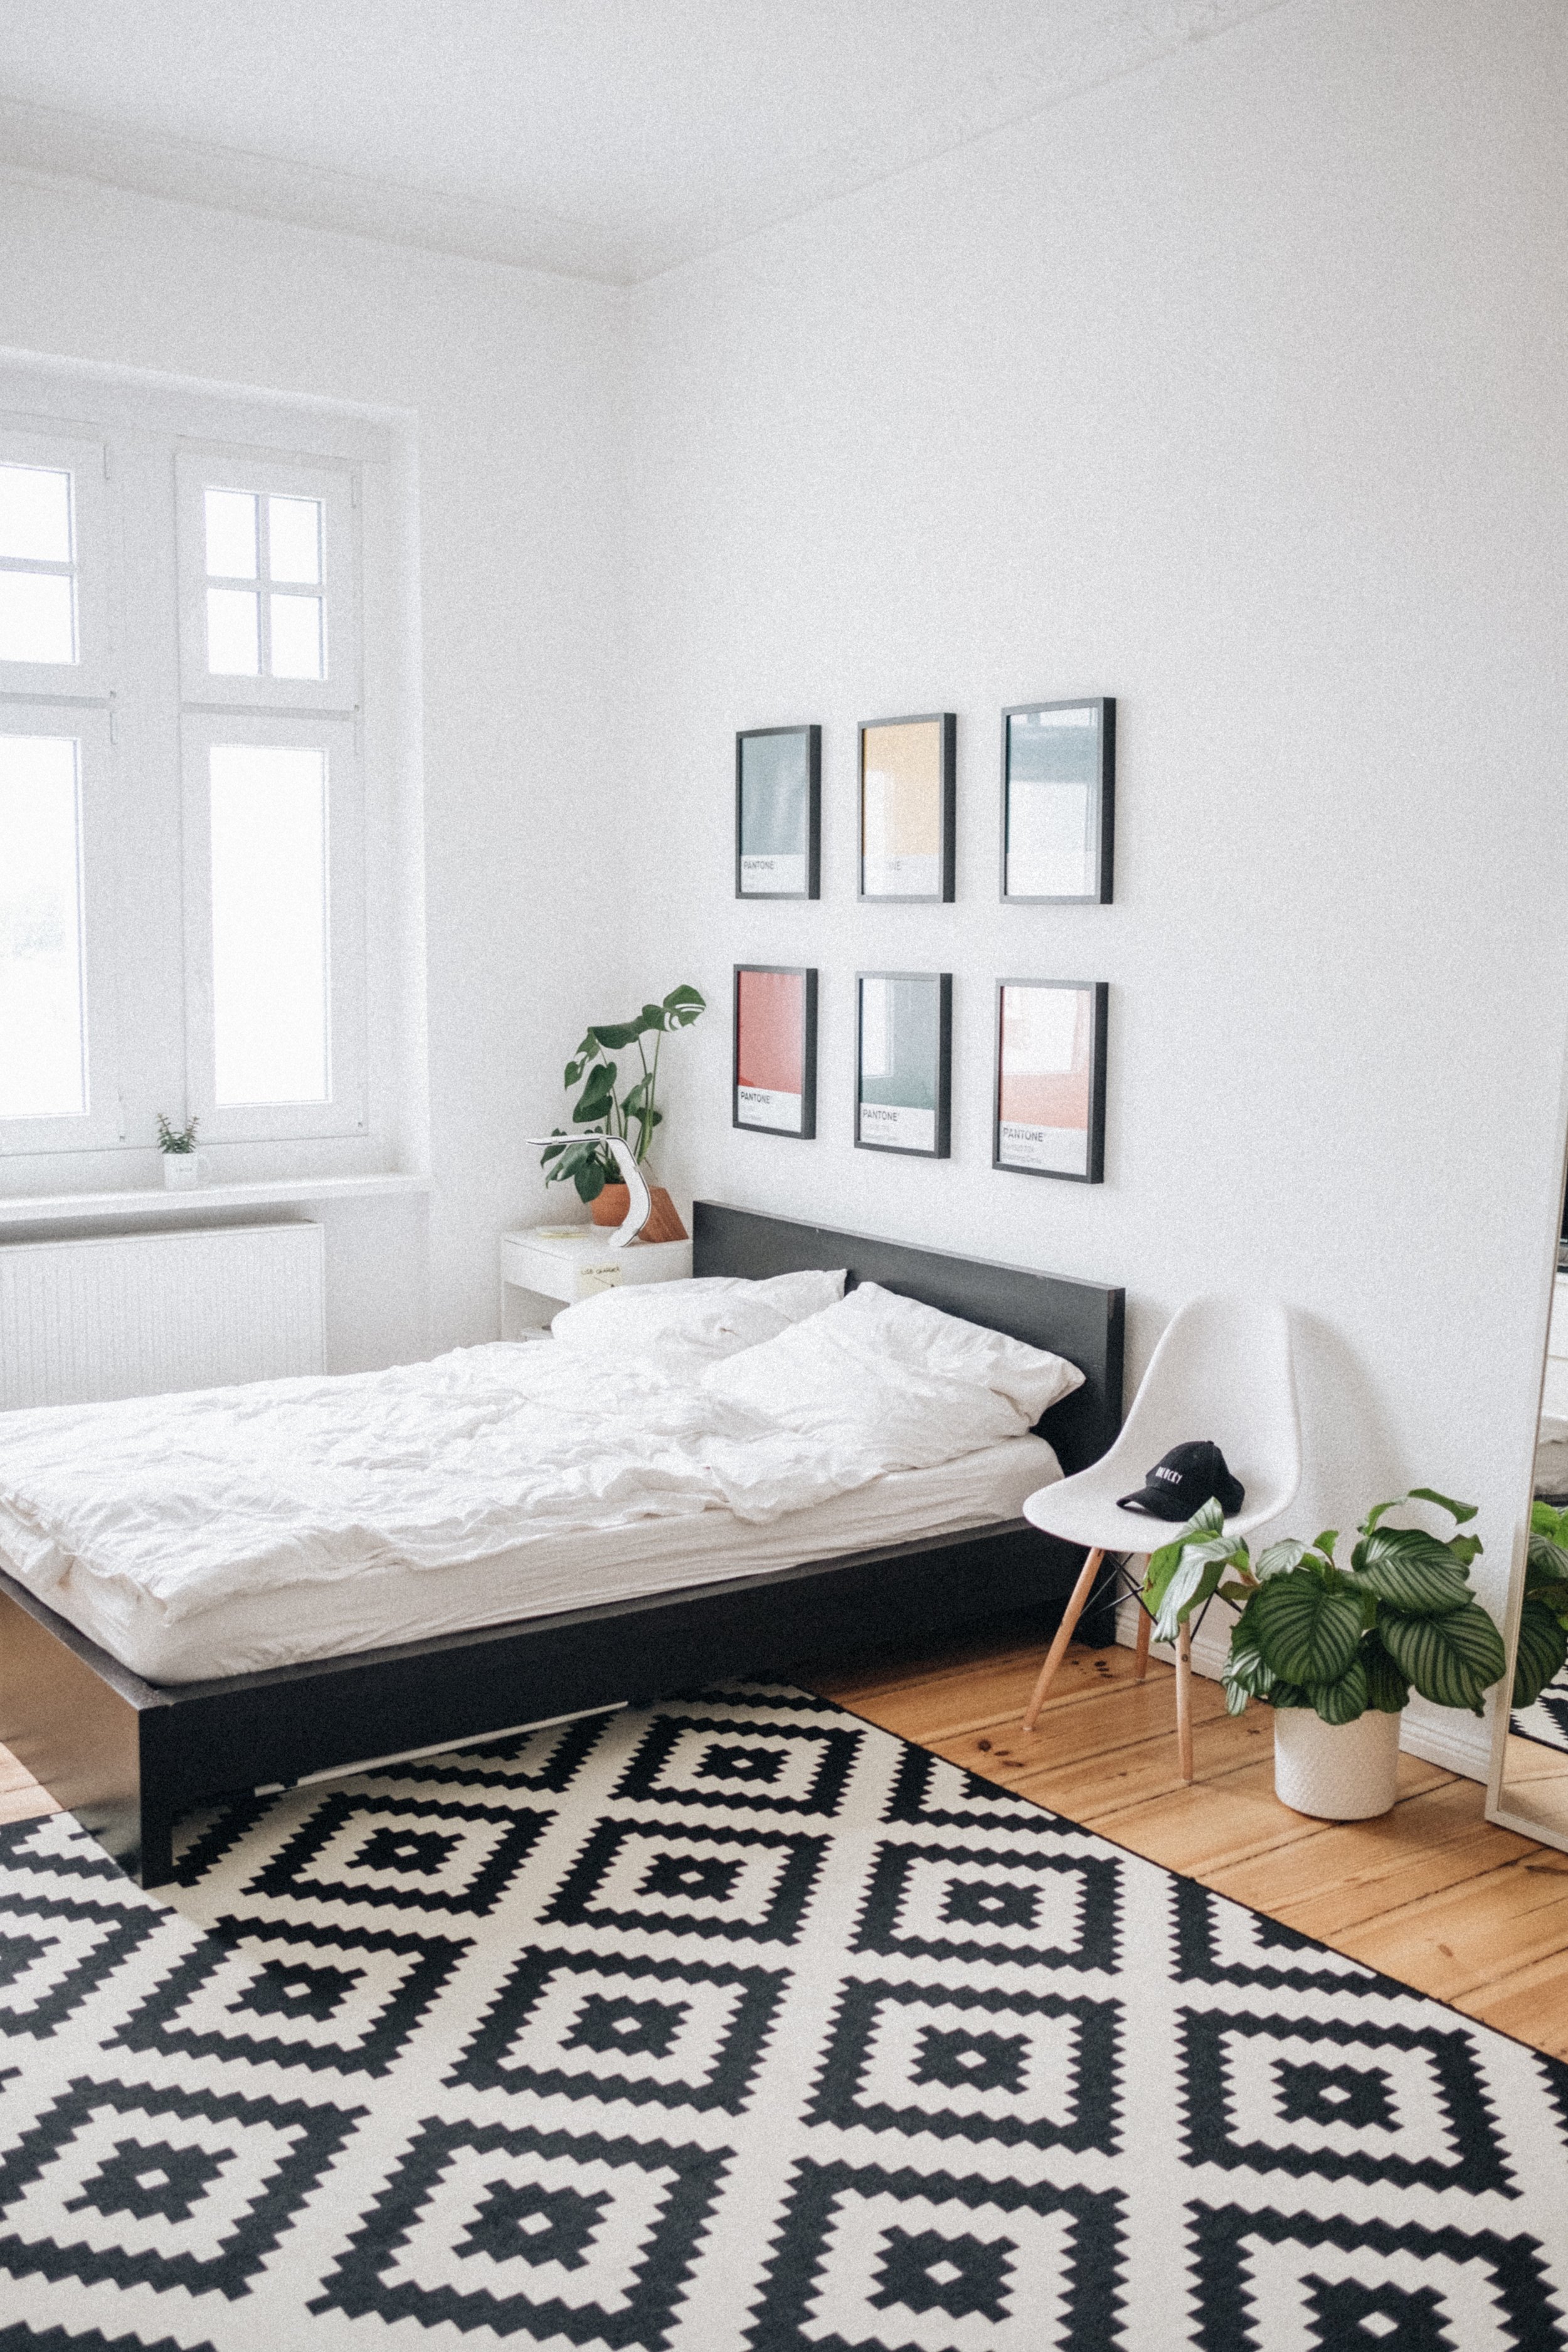 Bedroom with black and white carpet. Photo by Sonnie Hiles on Unsplash